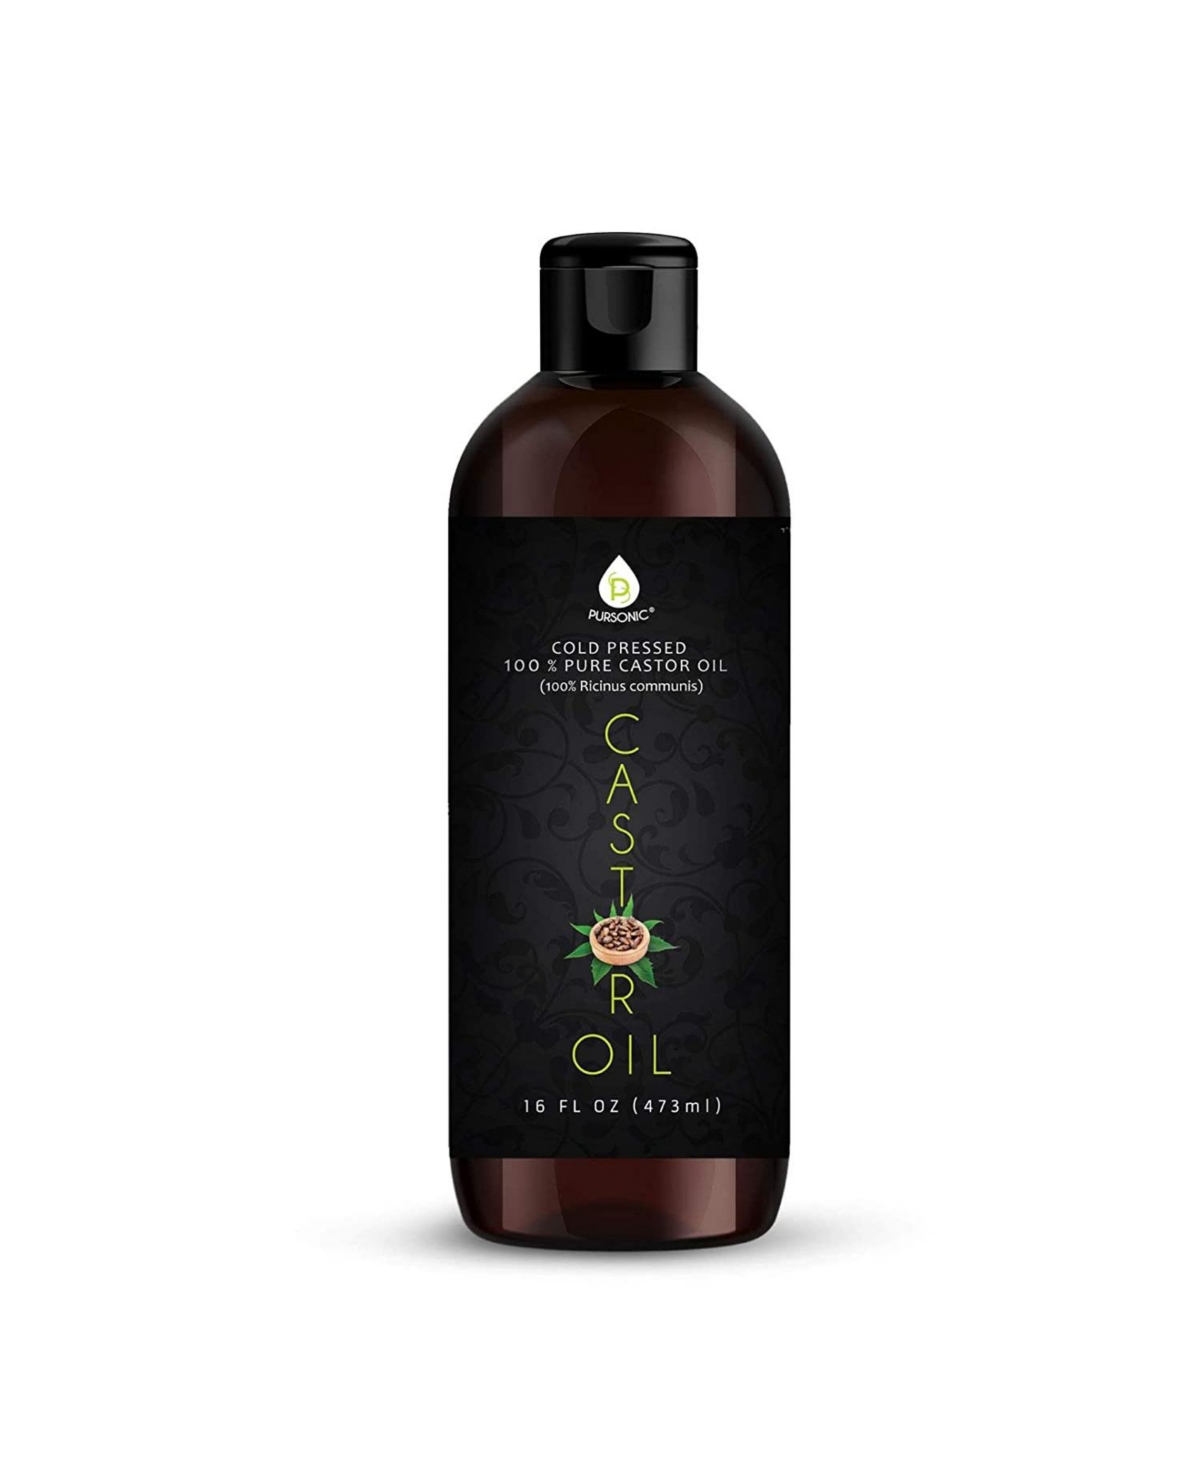 Castor oil (16oz): 100% pure, cold-pressed, hexane-free. Ideal for moisturizing, healing, hair growth, and eyelashes. - Natural